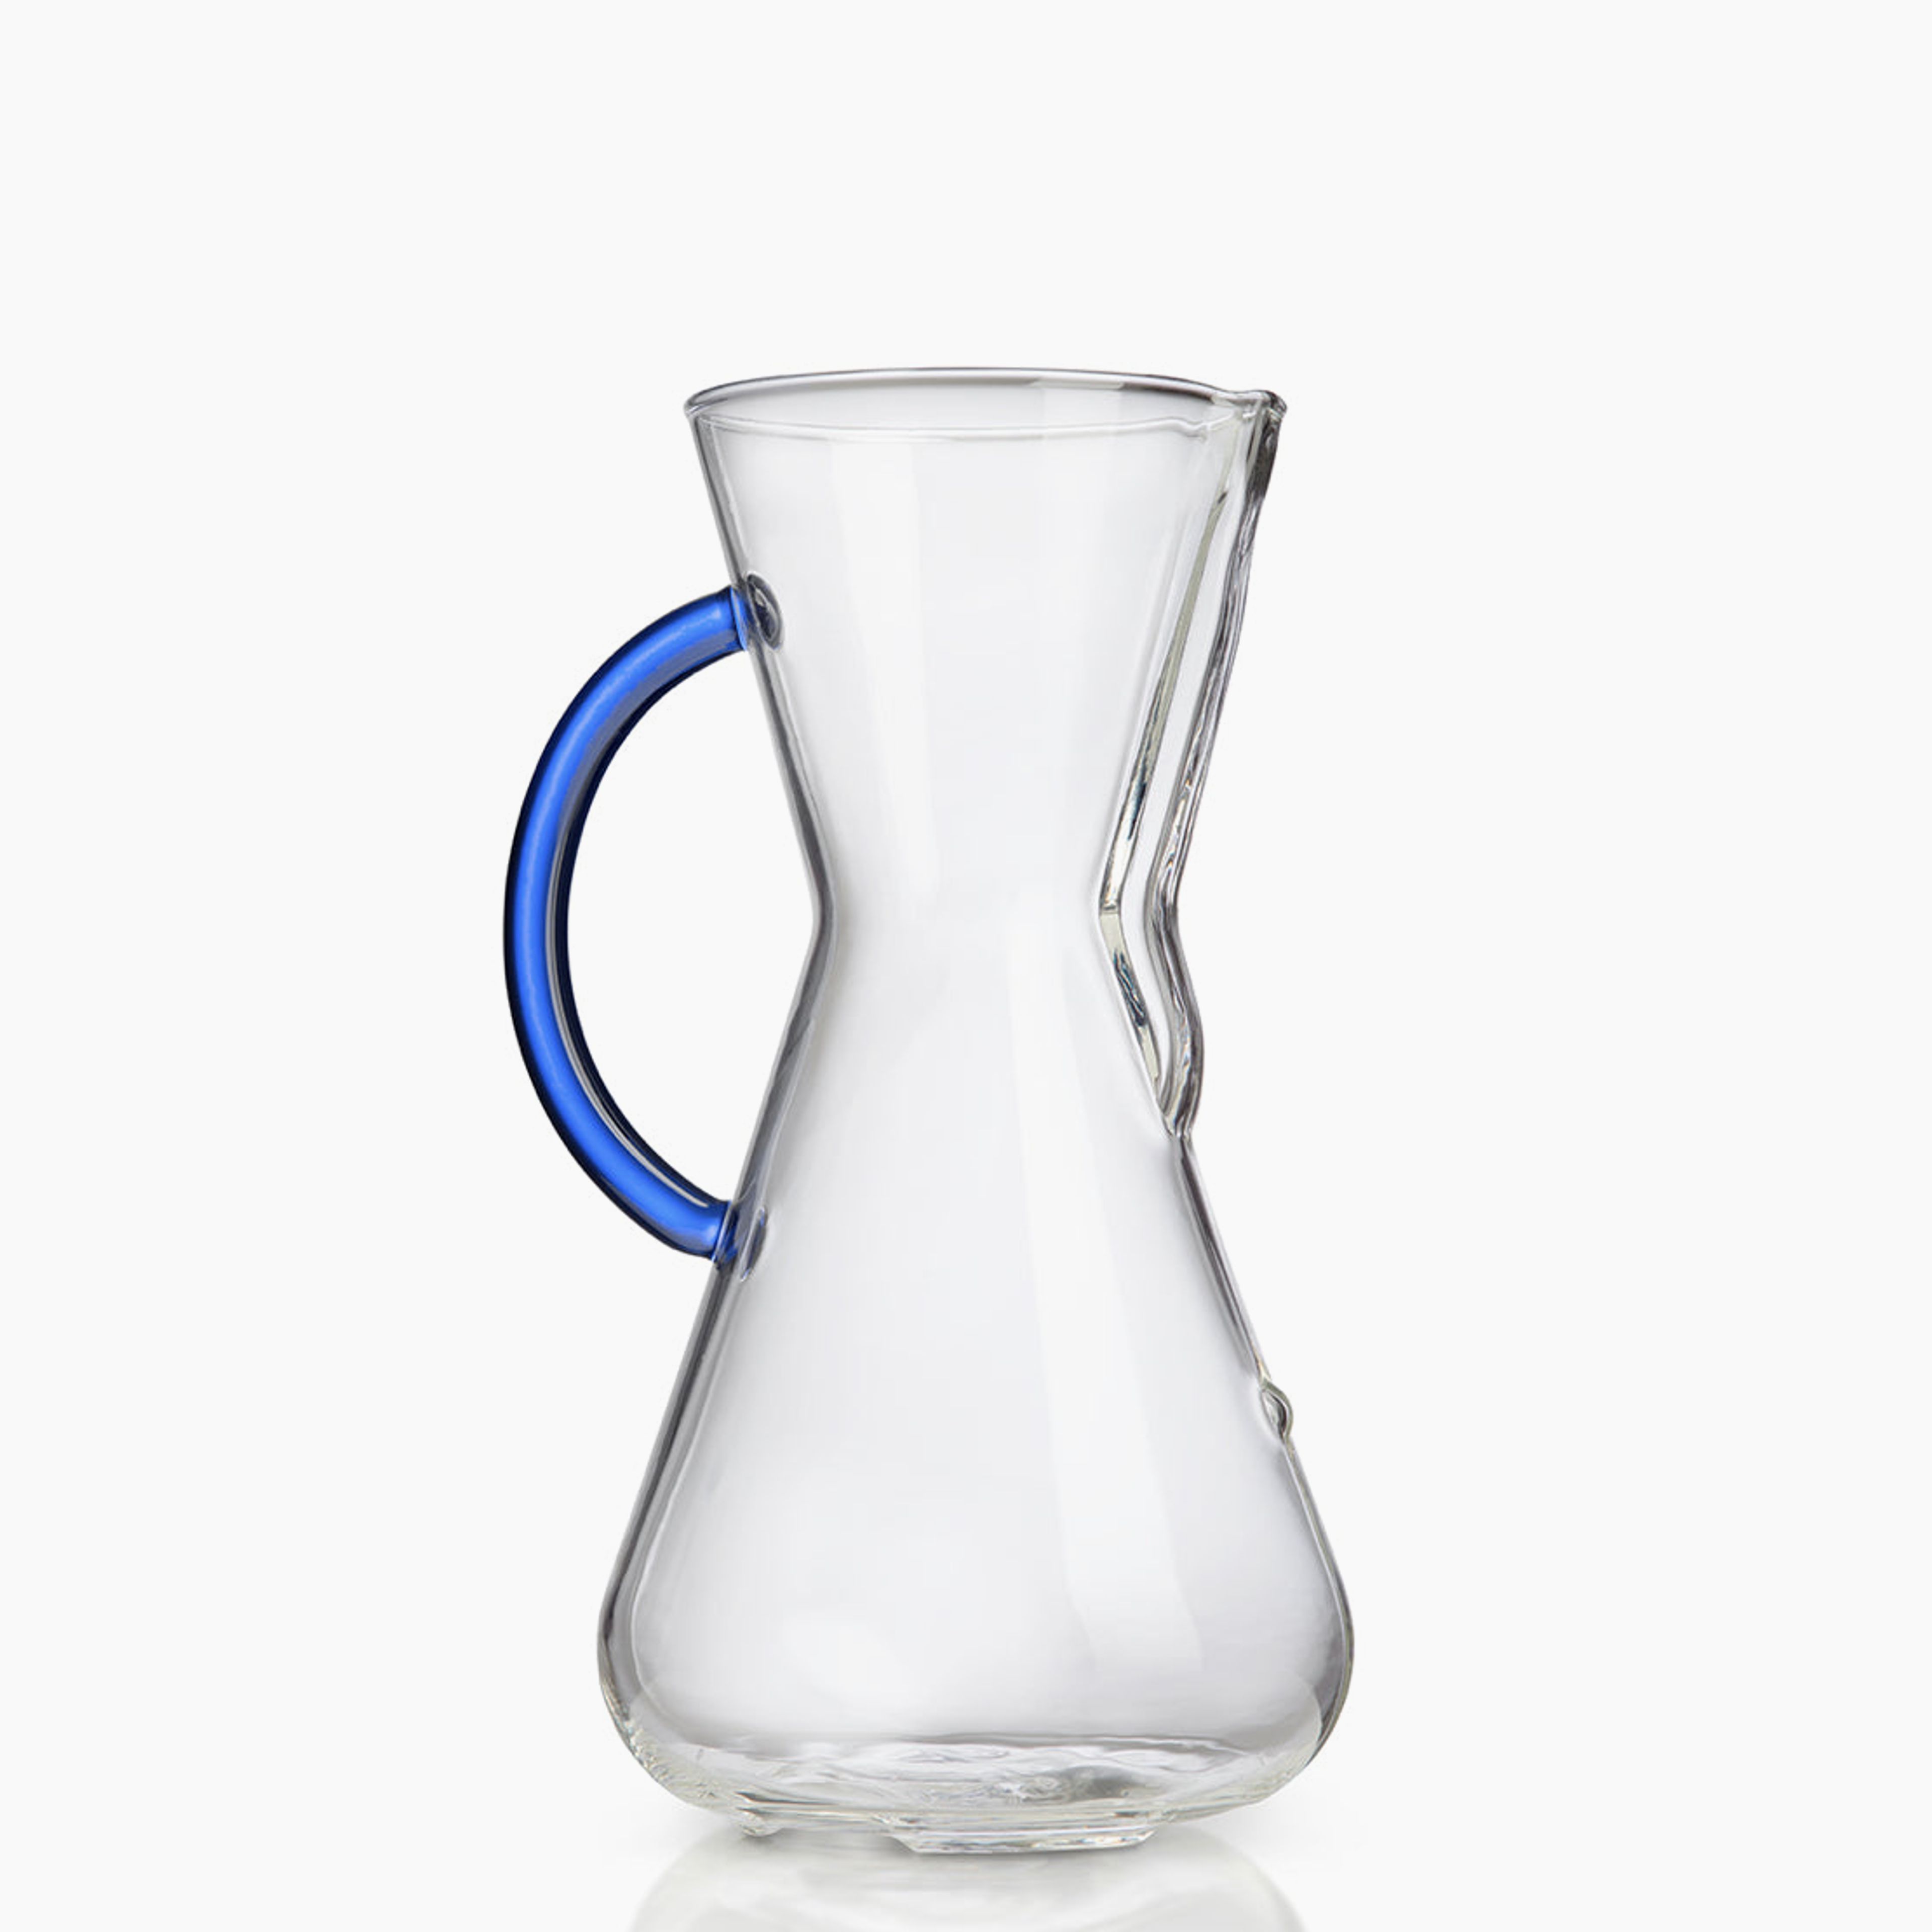 Chemex 3 Cup Glass Handle Brewer - Blue